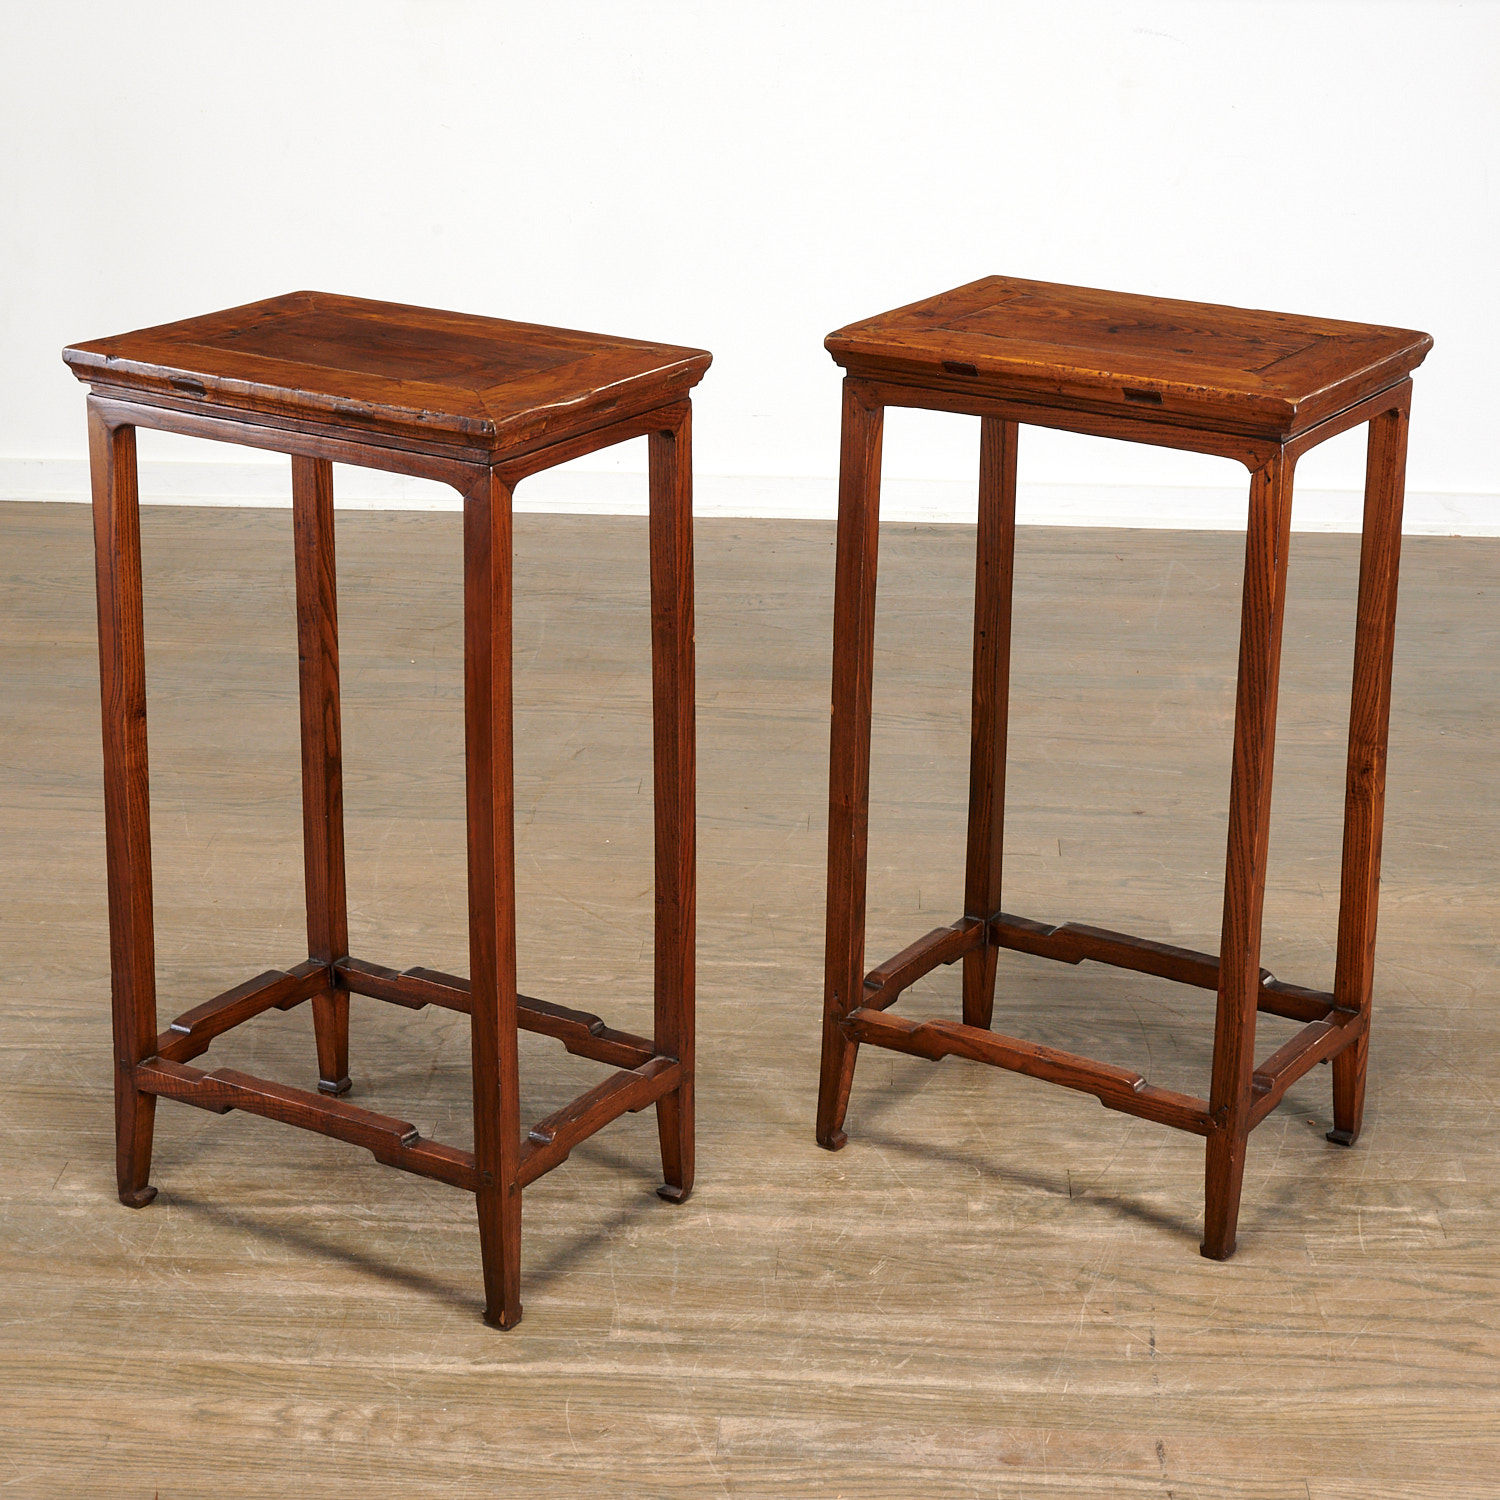 PAIR CHINESE HARDWOOD SIDE TABLES 2ce80f